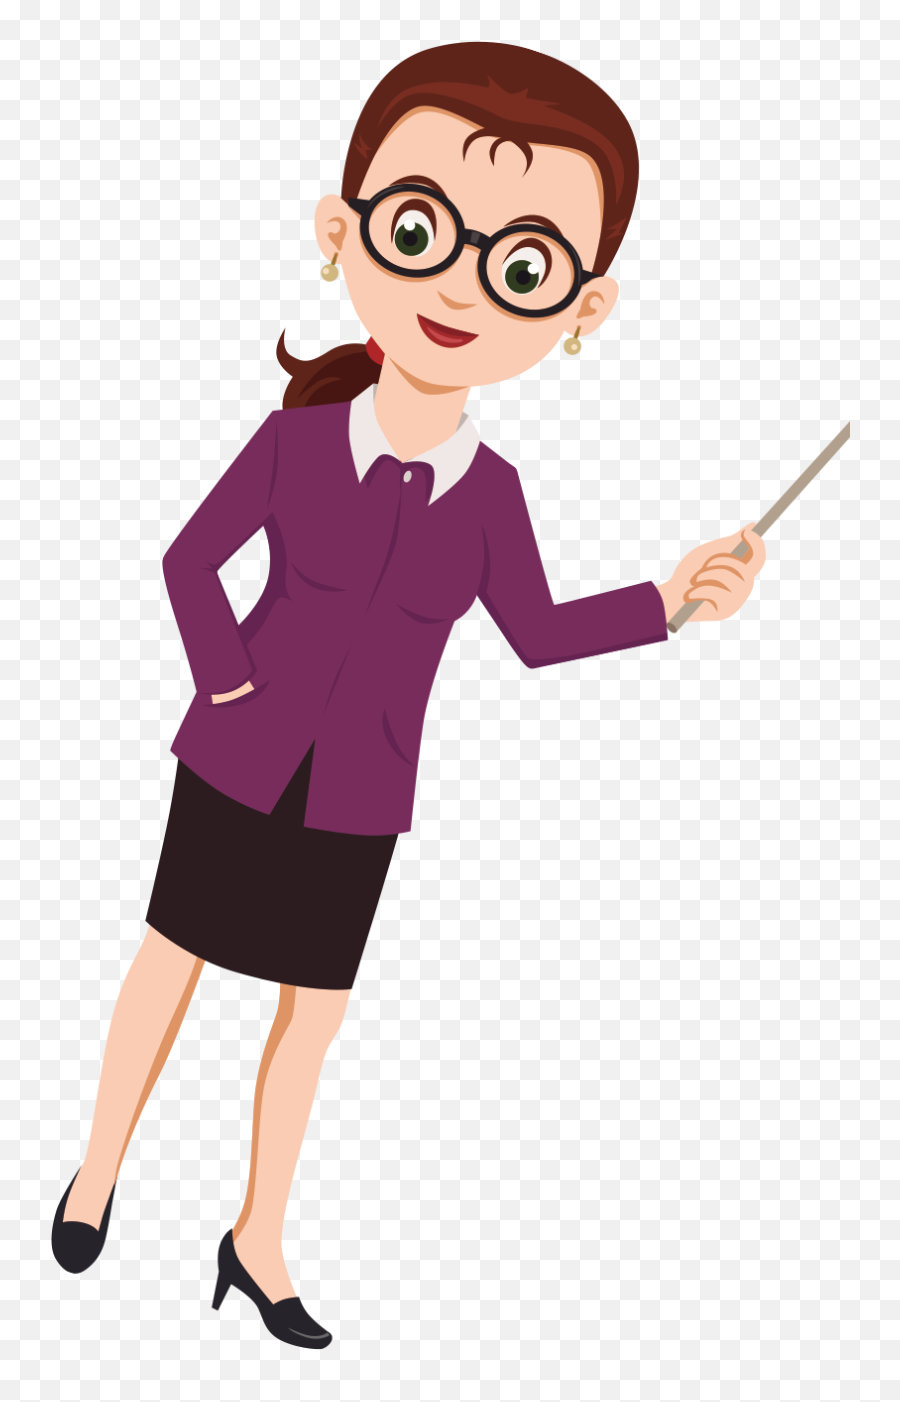 Cartoon Female Teacher Png Download - Transparent Cartoon Teacher,Teacher  Transparent - free transparent png images 